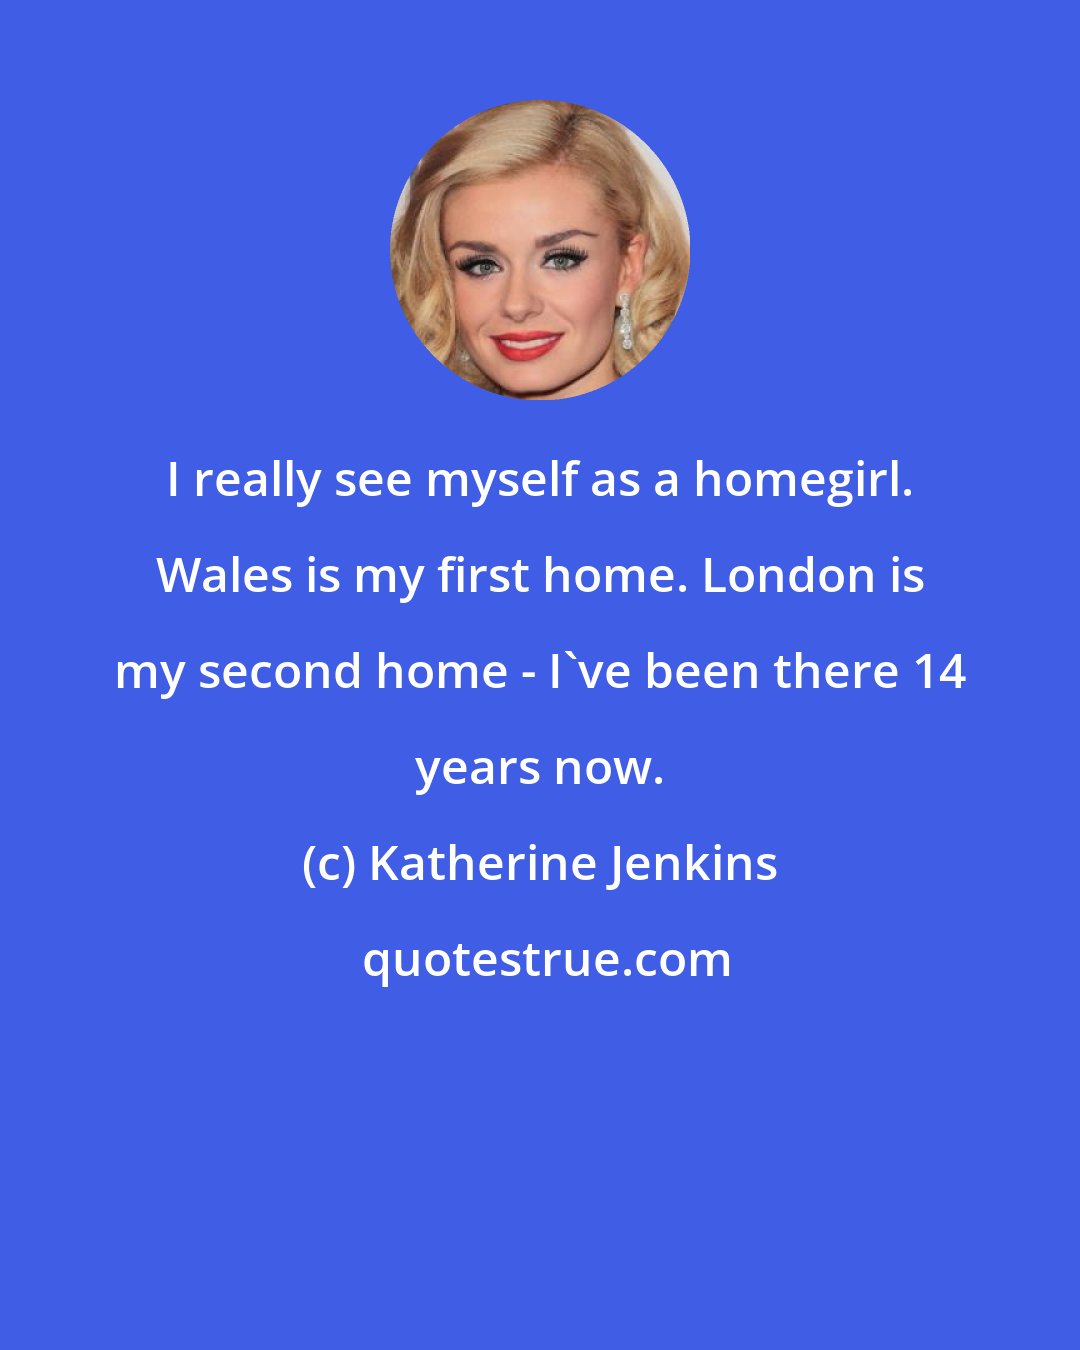 Katherine Jenkins: I really see myself as a homegirl. Wales is my first home. London is my second home - I've been there 14 years now.